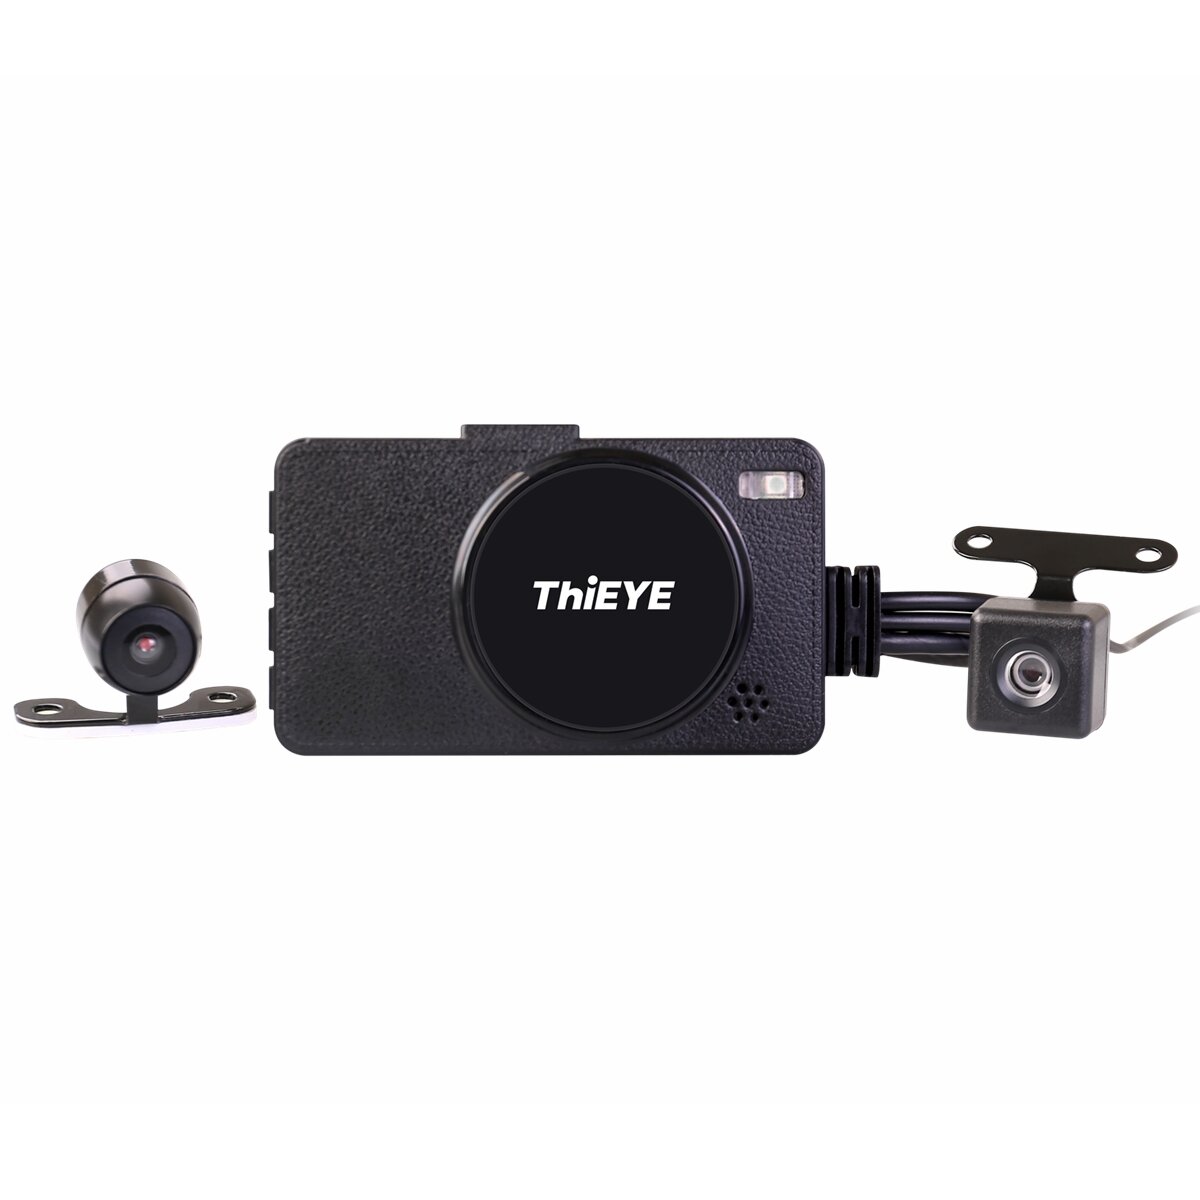 New ThiEYE MOTO ONE 1080P Sport Camera Auto DVR Motor Dash Cam With Dual Lens Portable Front Rear Camcorders For Car Motorcycle Vehicle